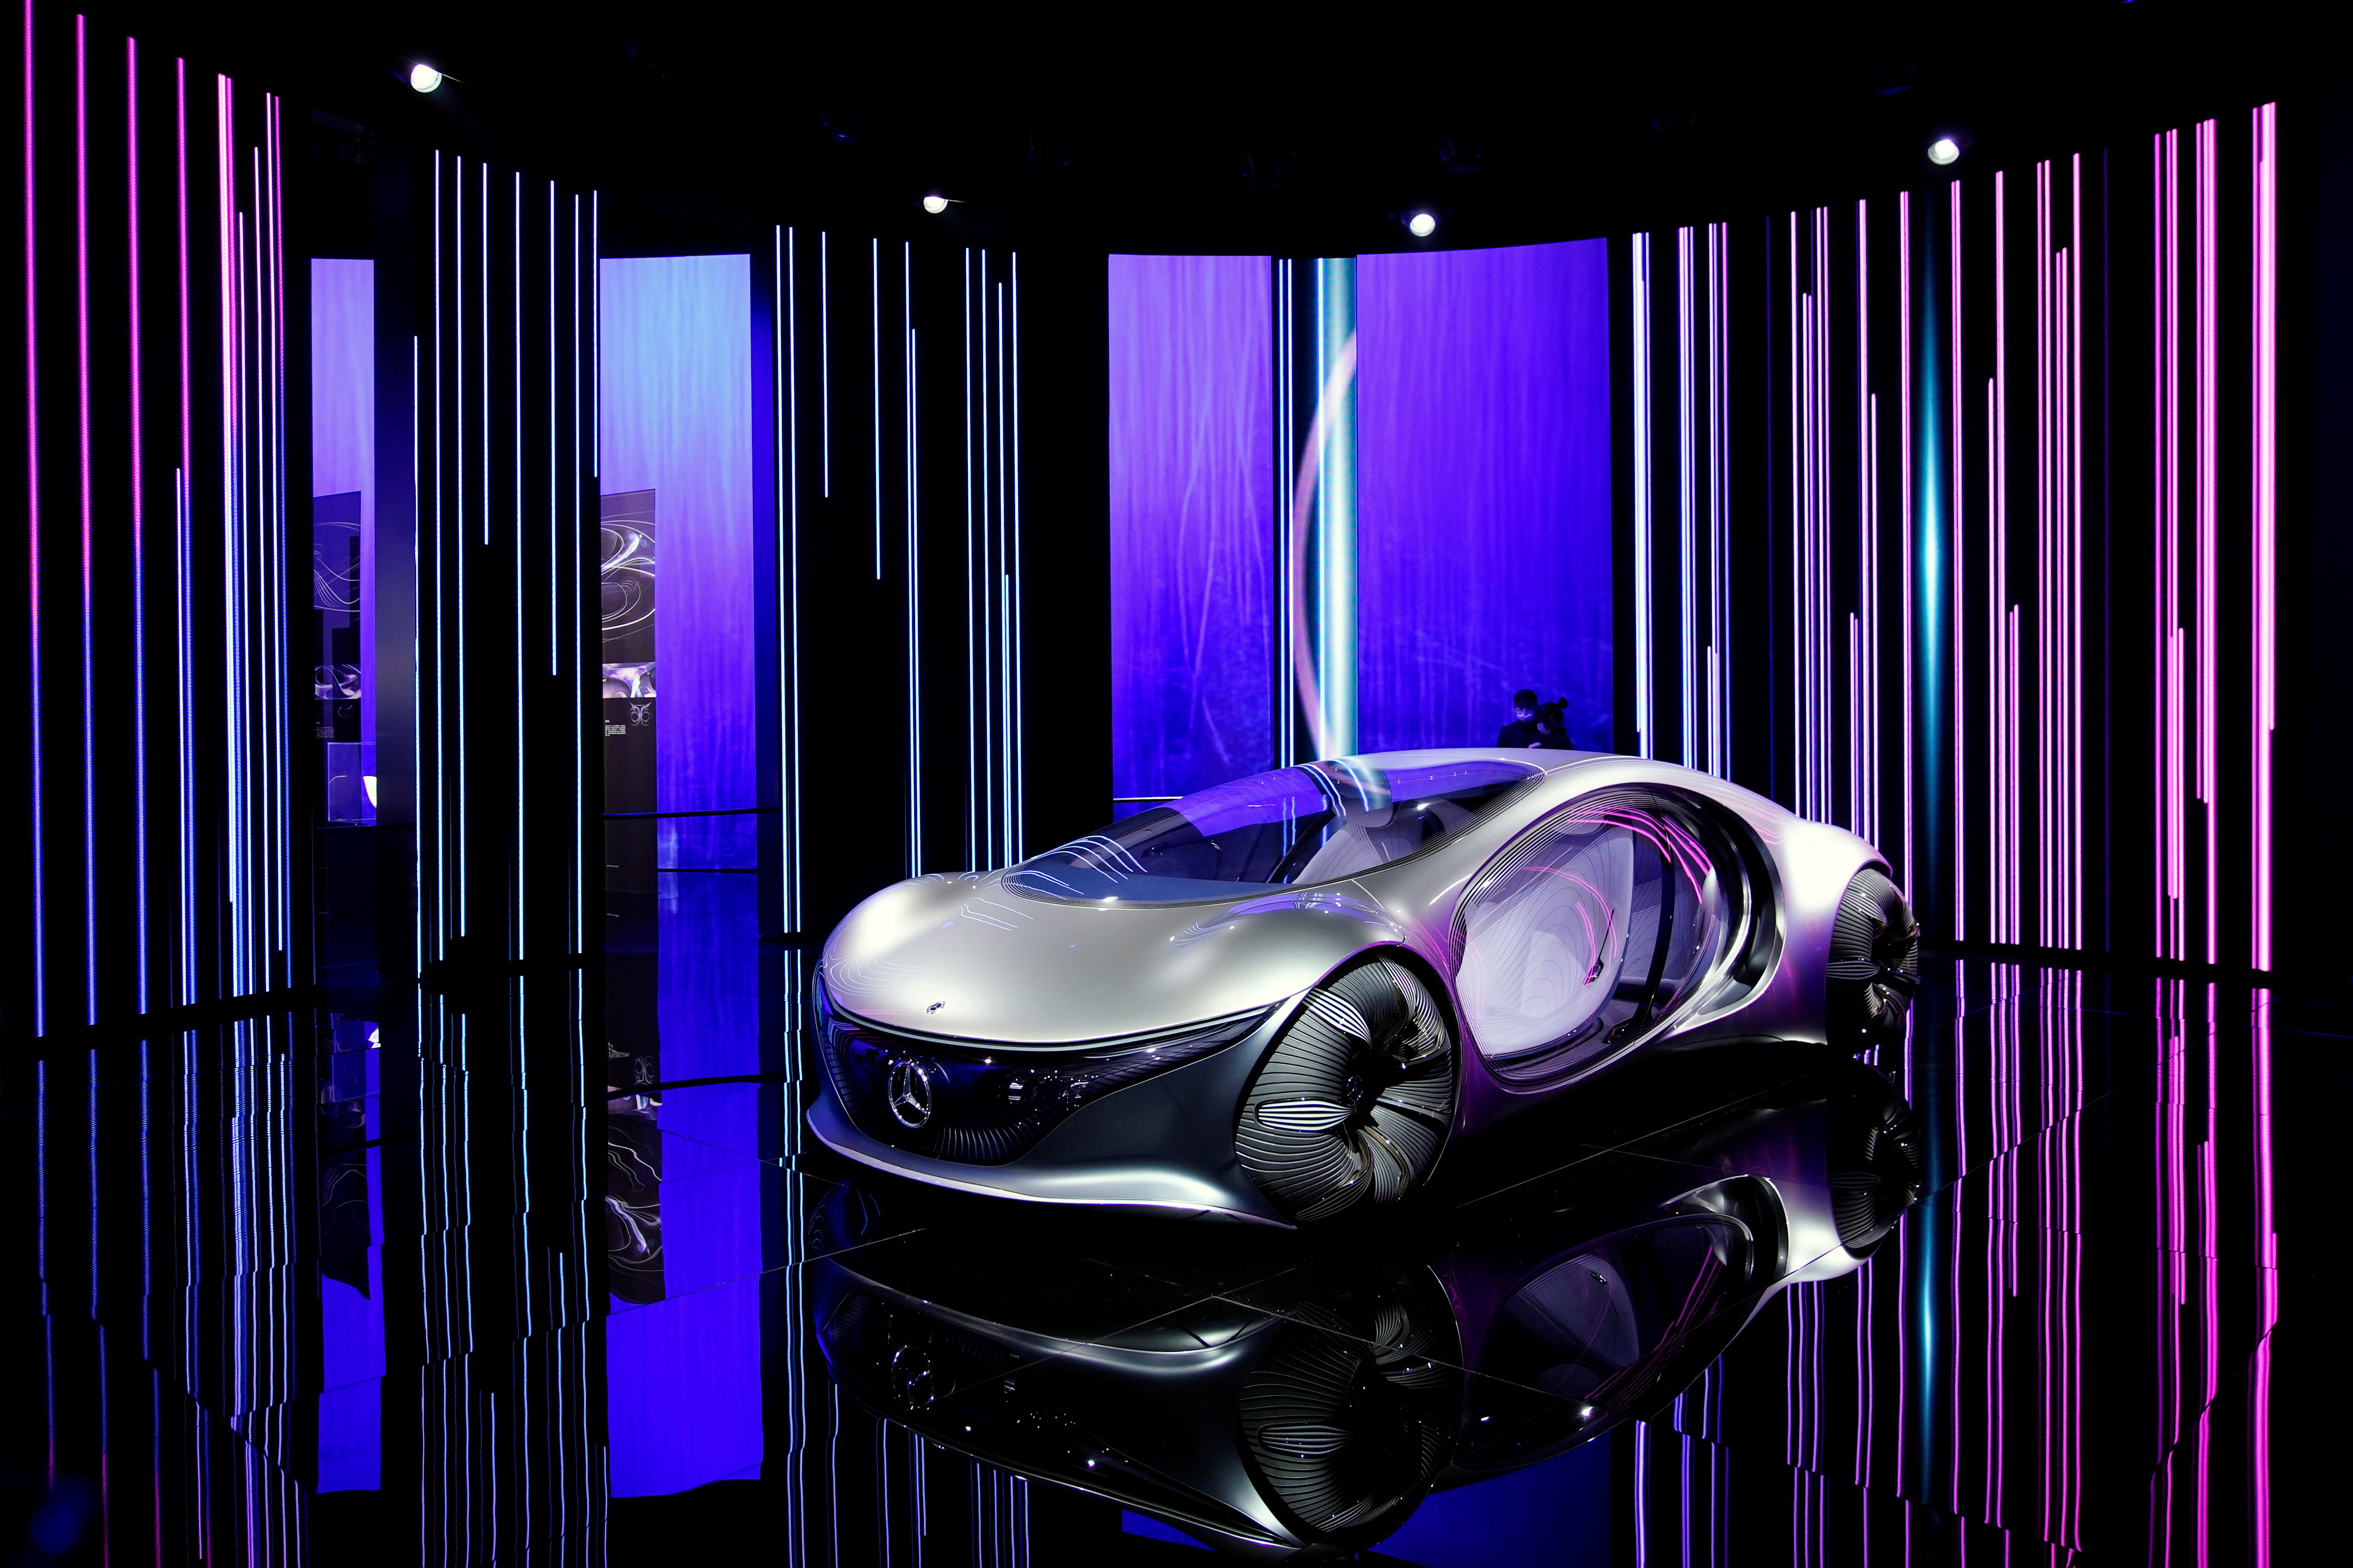 The ultimate drive in: Mercedes unveils car with a built in cinema projector